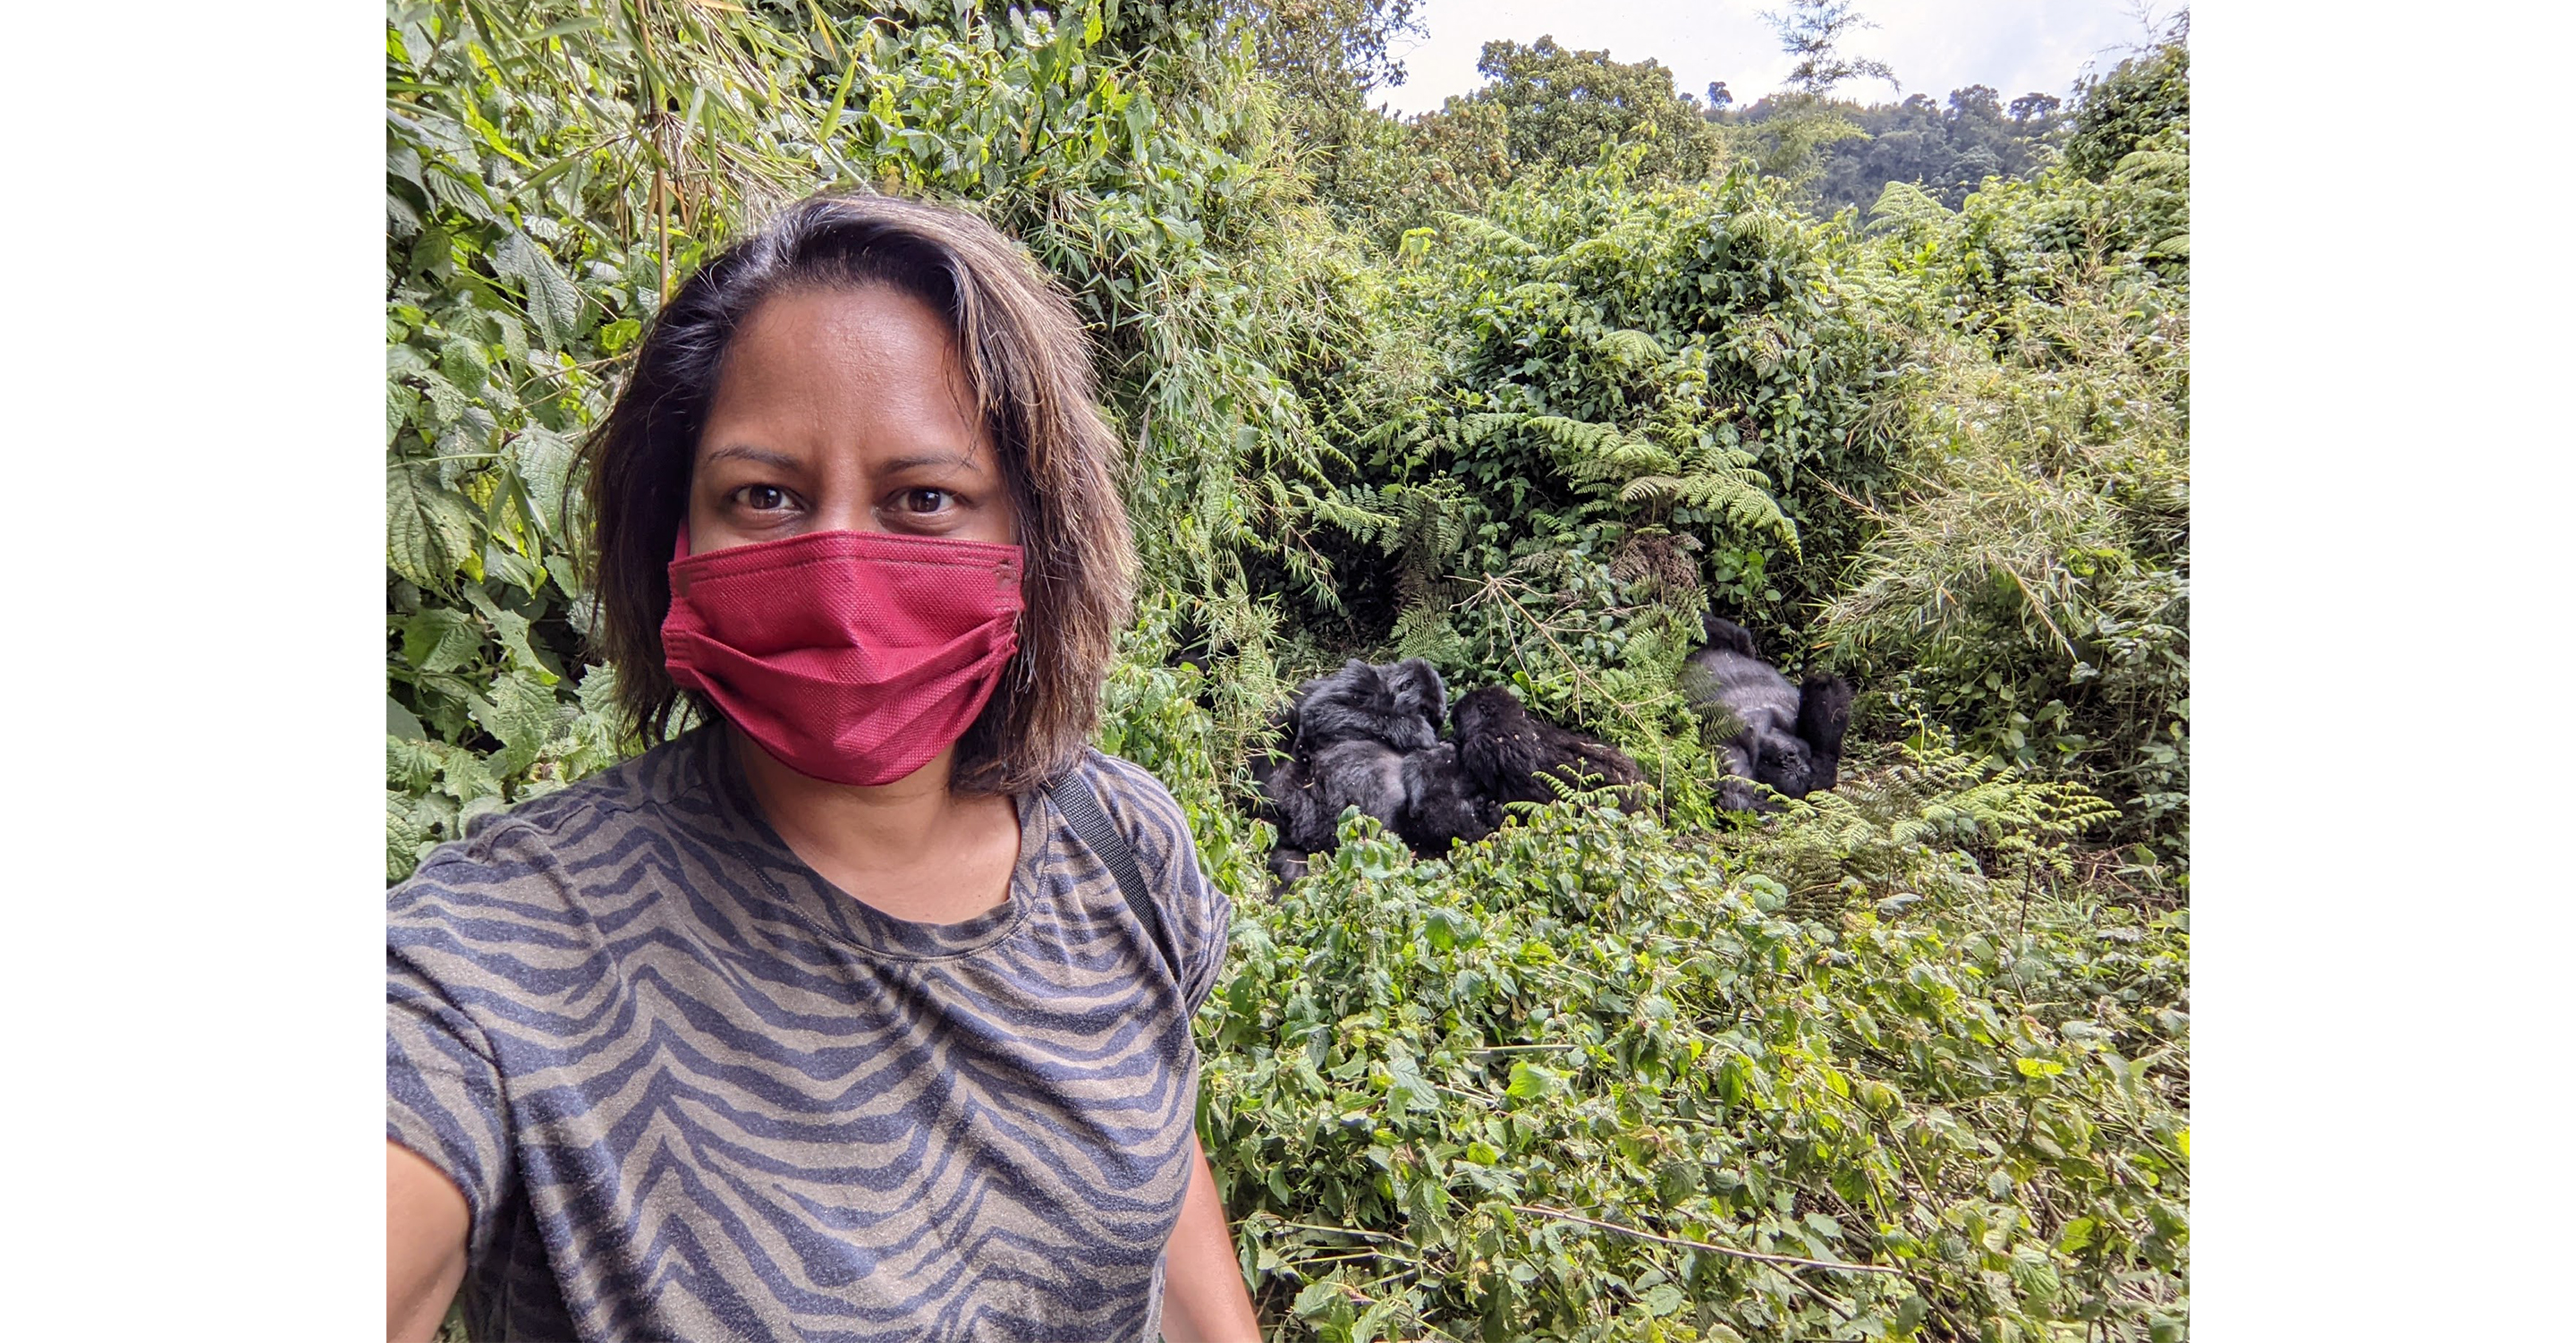 Coming face-to-face with gorillas in Volcanoes National Park, Rwanda, 2022.